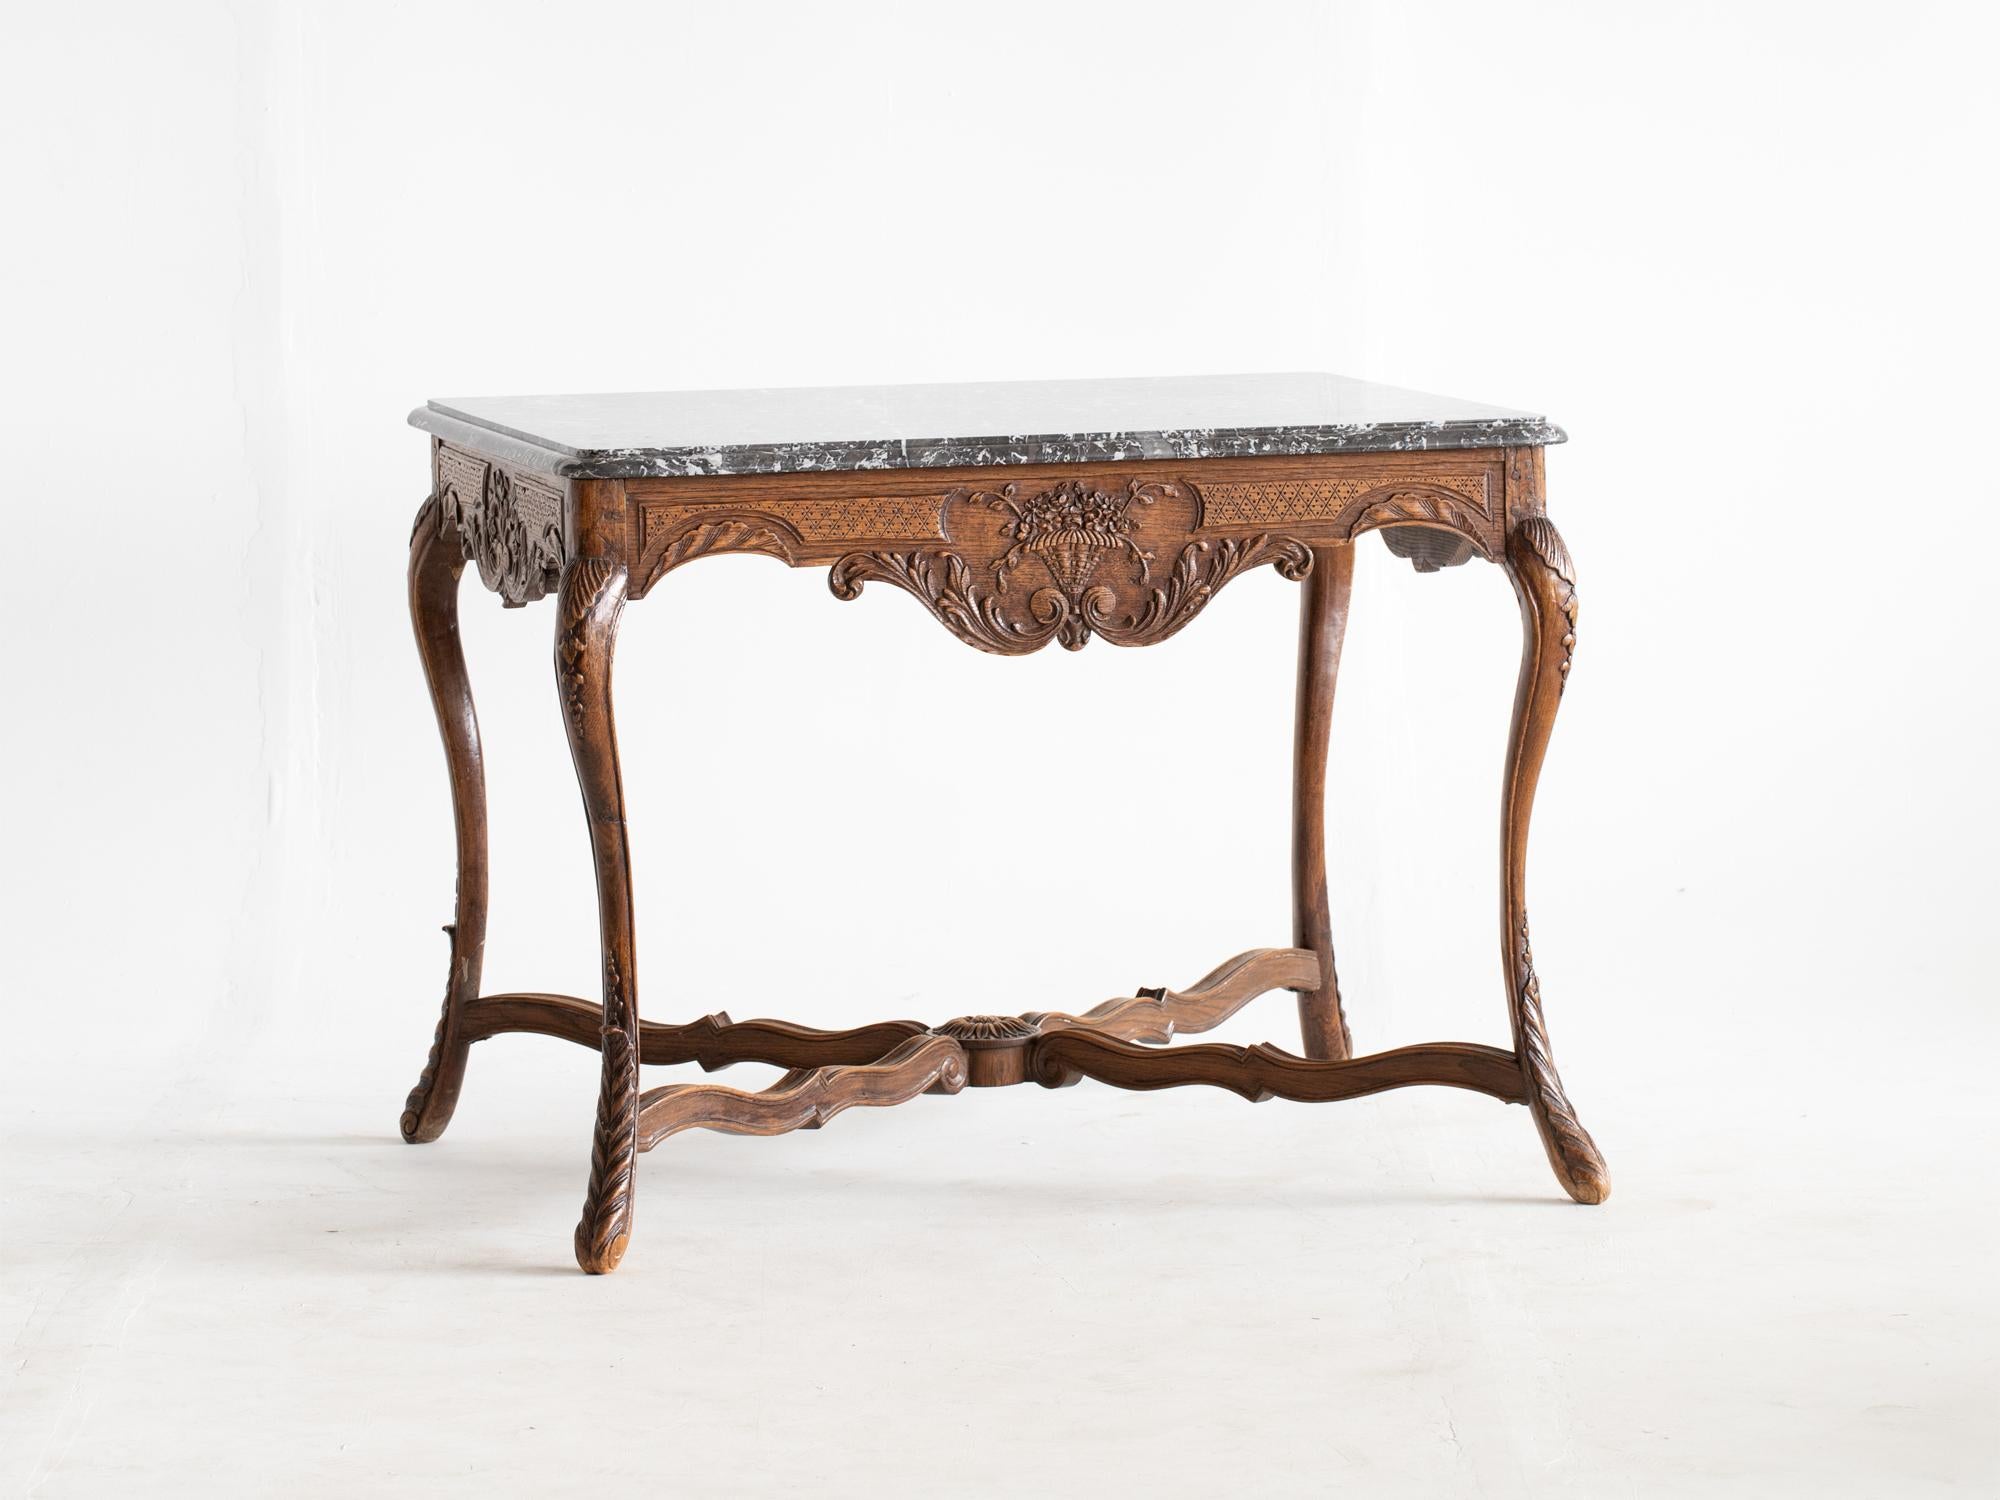 A marble-top oak centre table in the Louis XV taste. French, late 19C.

Intricate carving consistent on all sides with beautifully veined grey marble top.

In very good order with light cosmetic wear.

75 x 99 x 75 cm

29.5 x 39.0 x 29.5 “